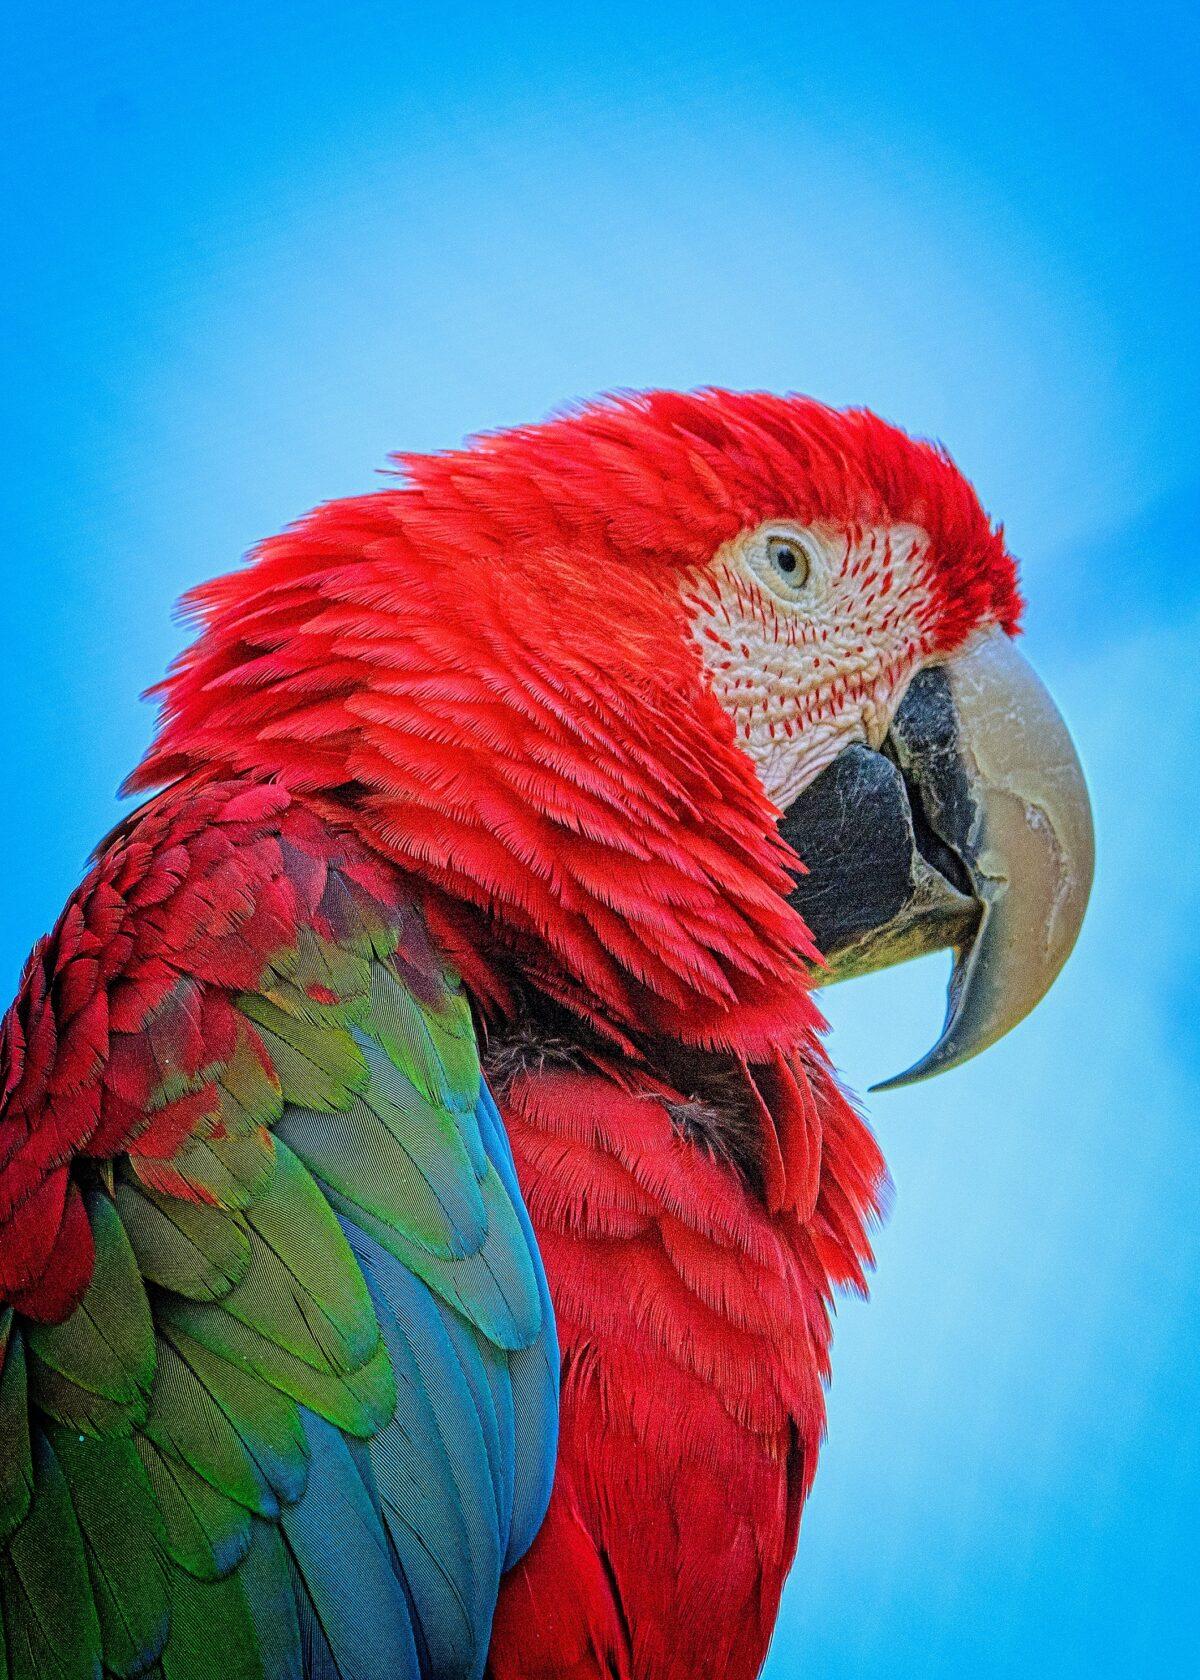 One of the largest and most colorful of all macaws, the scarlet macaw is the national bird of Honduras. (Copyright Fred J. Eckert)